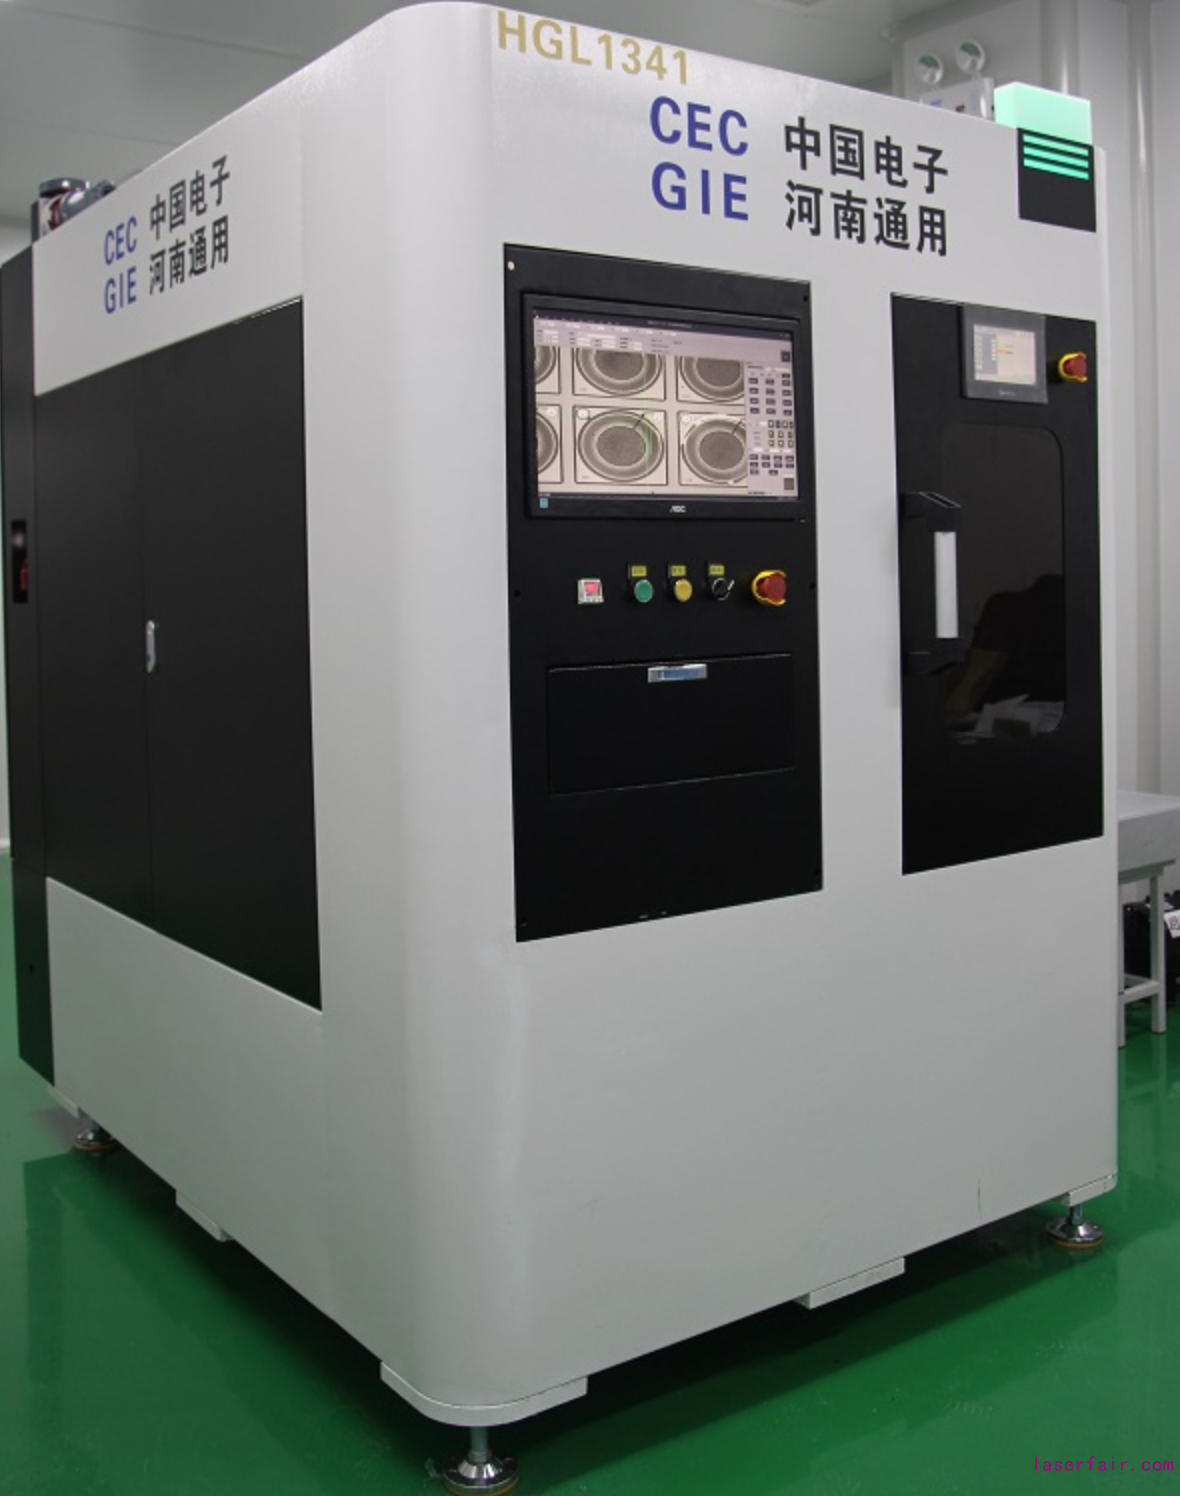 Chinese firm develops country<em></em>'s first semico<em></em>nductor laser invisible wafer scribing machine-cnTechPost